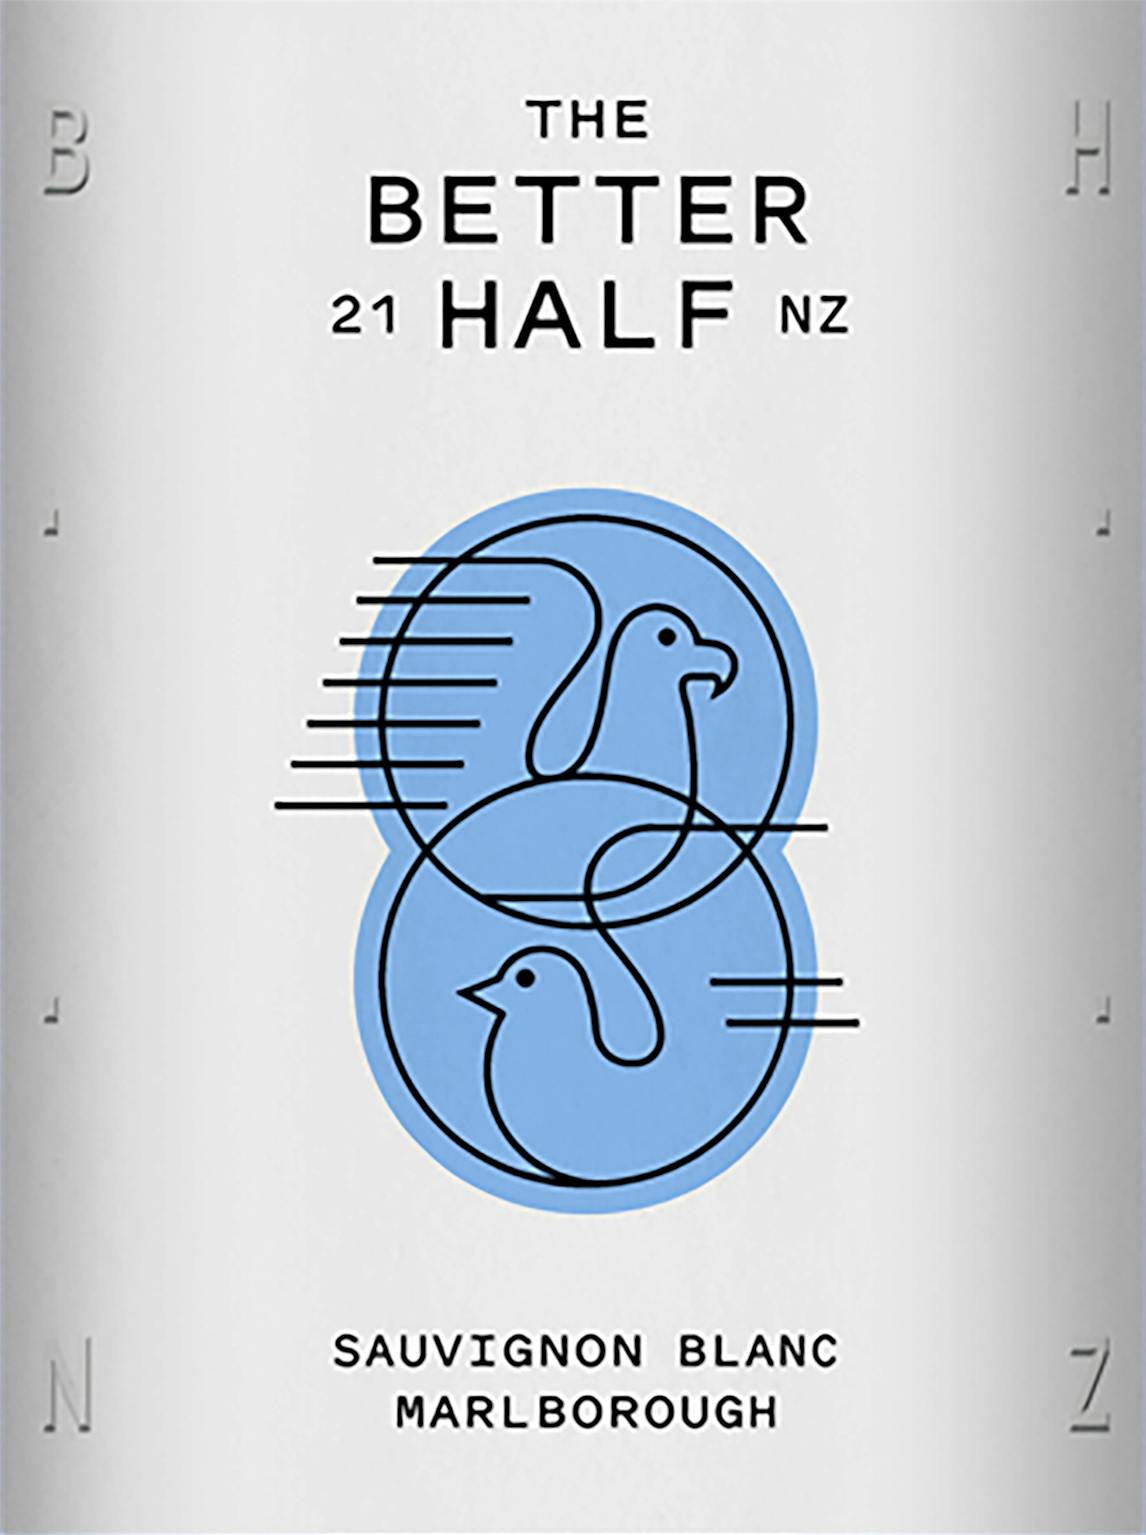 Label for The Better Half